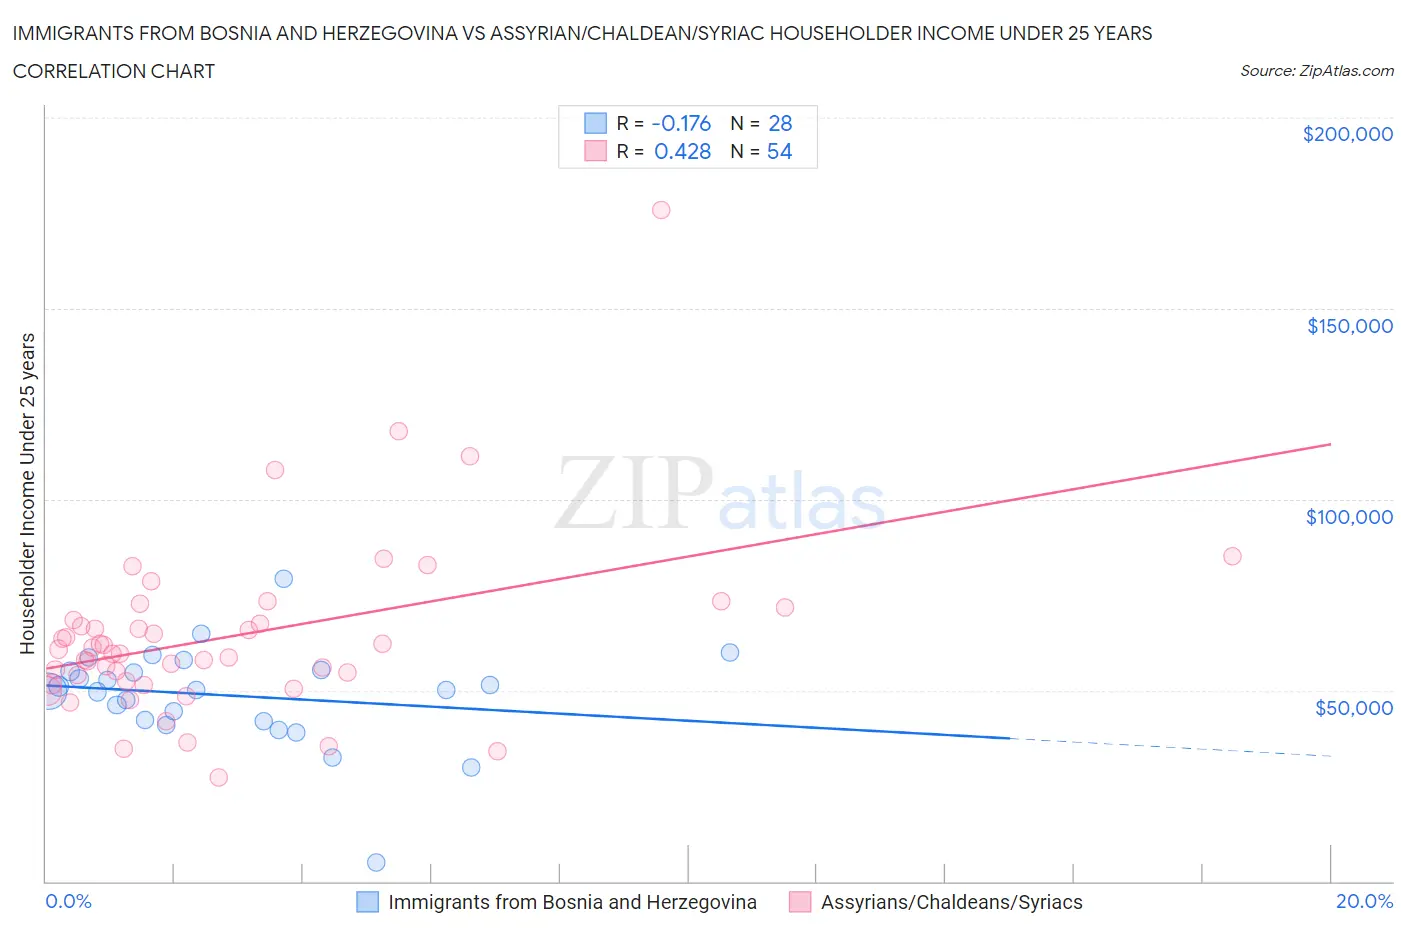 Immigrants from Bosnia and Herzegovina vs Assyrian/Chaldean/Syriac Householder Income Under 25 years